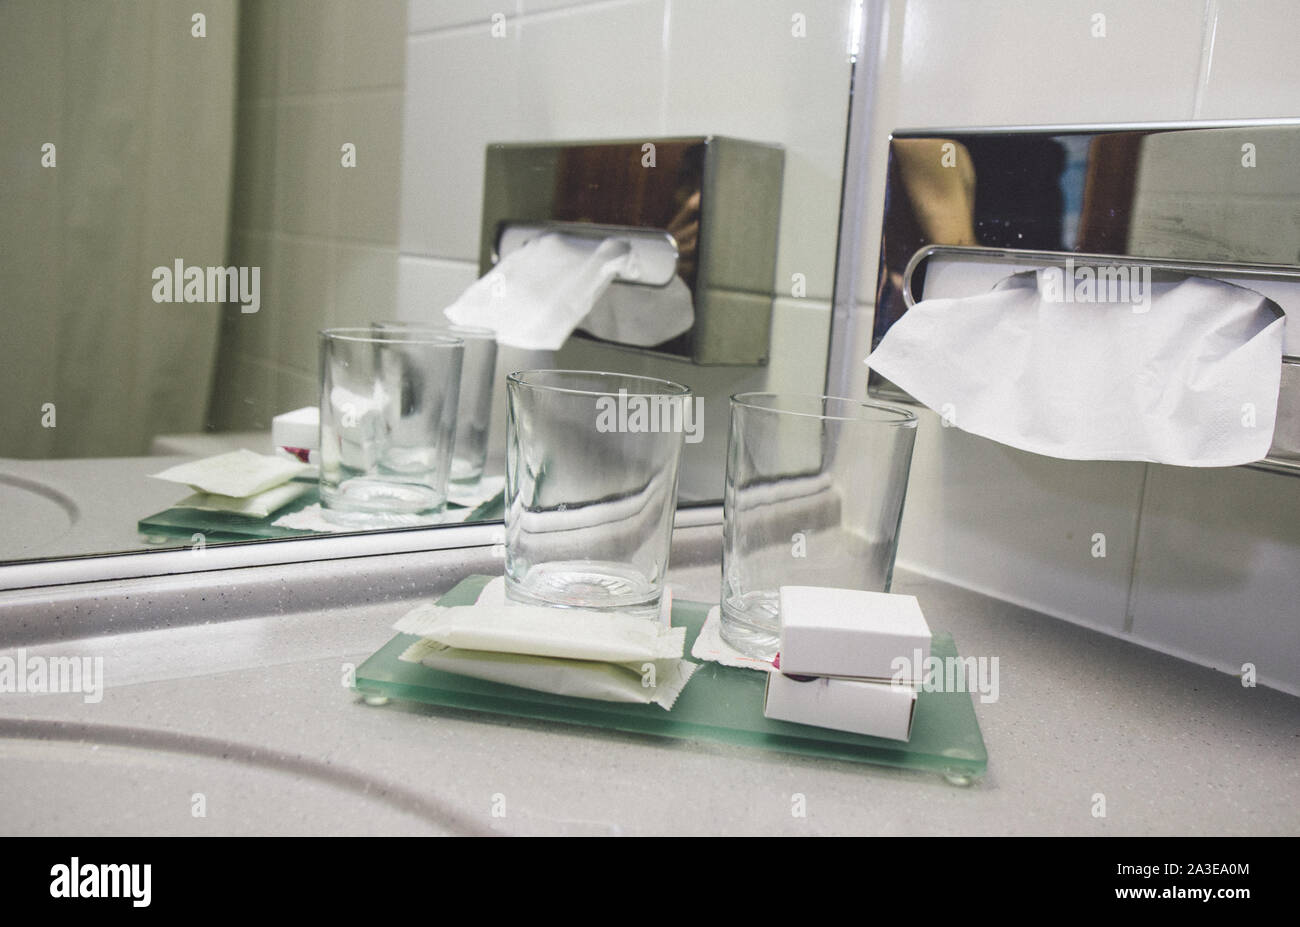 Water tap bath in modern hotel luxury leisure service. Hotel room service dental wash glass and soap hygienic person cleaning washing. Paper towels sh Stock Photo